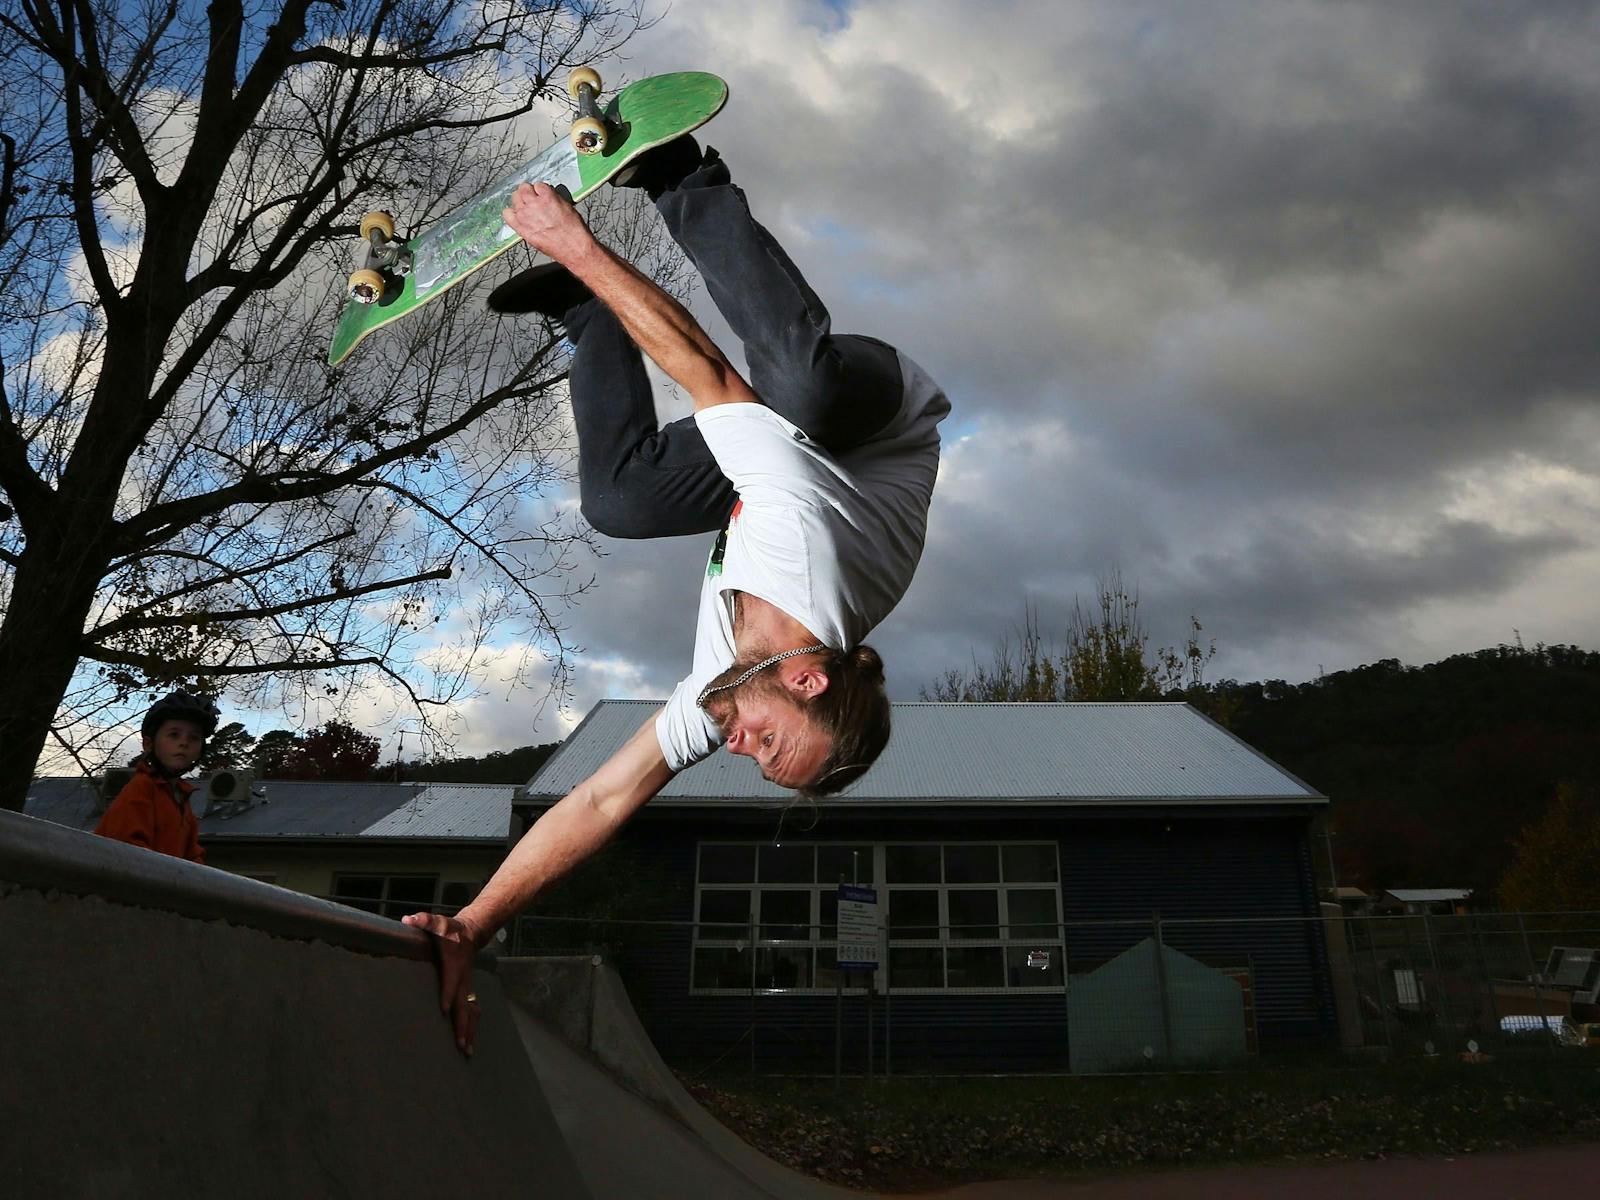 Image for North East Skate Park Series - Round Fourteen, Mount Beauty